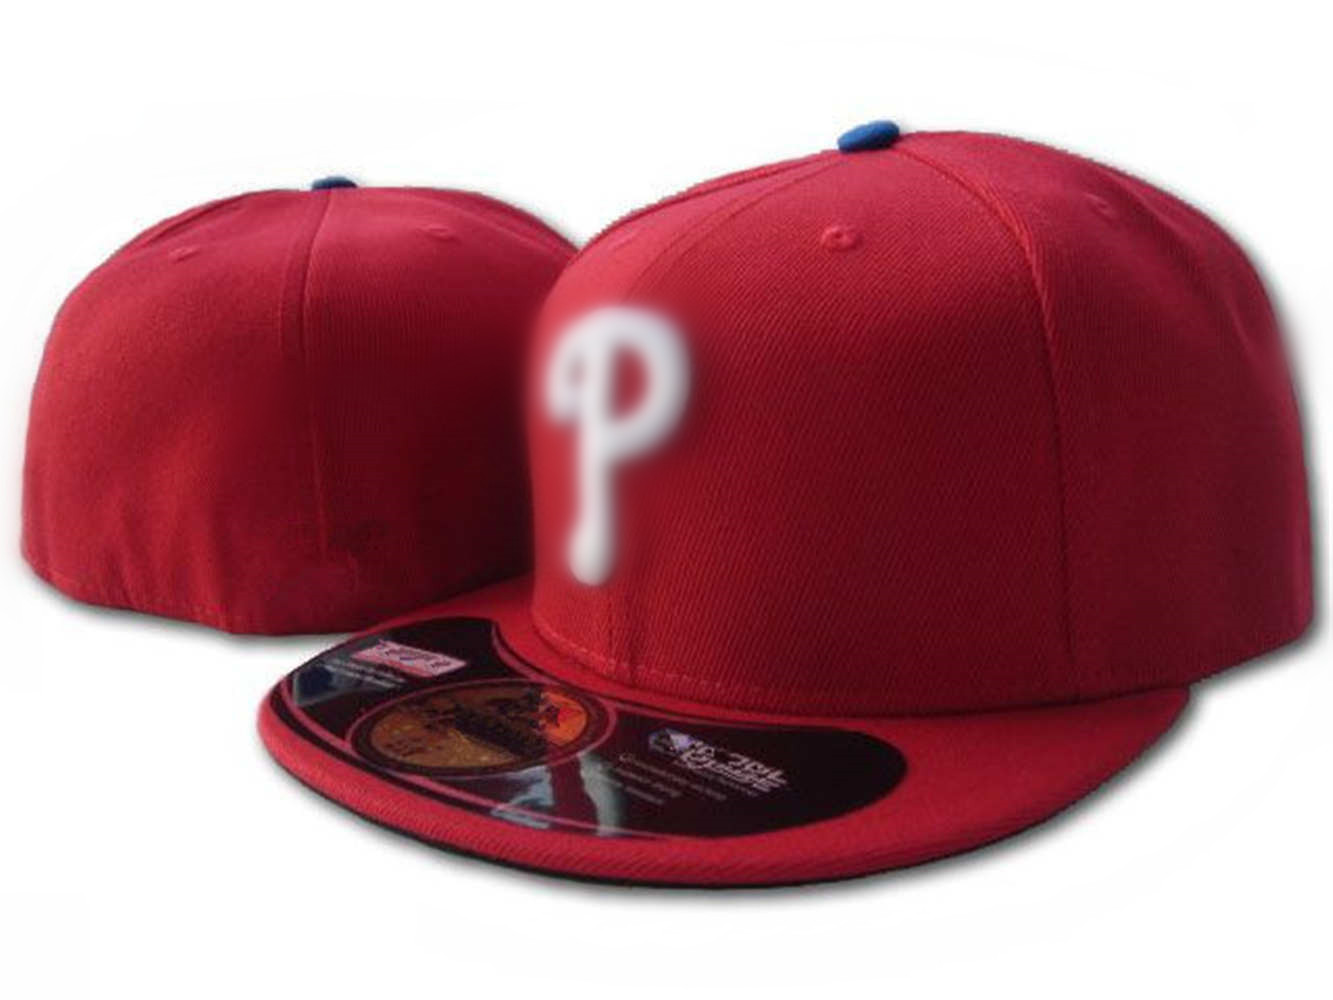 

Top Selling Phillies P letter Baseball caps Newest Arrivals Mens bones swag Gorra Cotton Gorras For Adult Fitted Hats h8-6.7, Welcome ask real photo